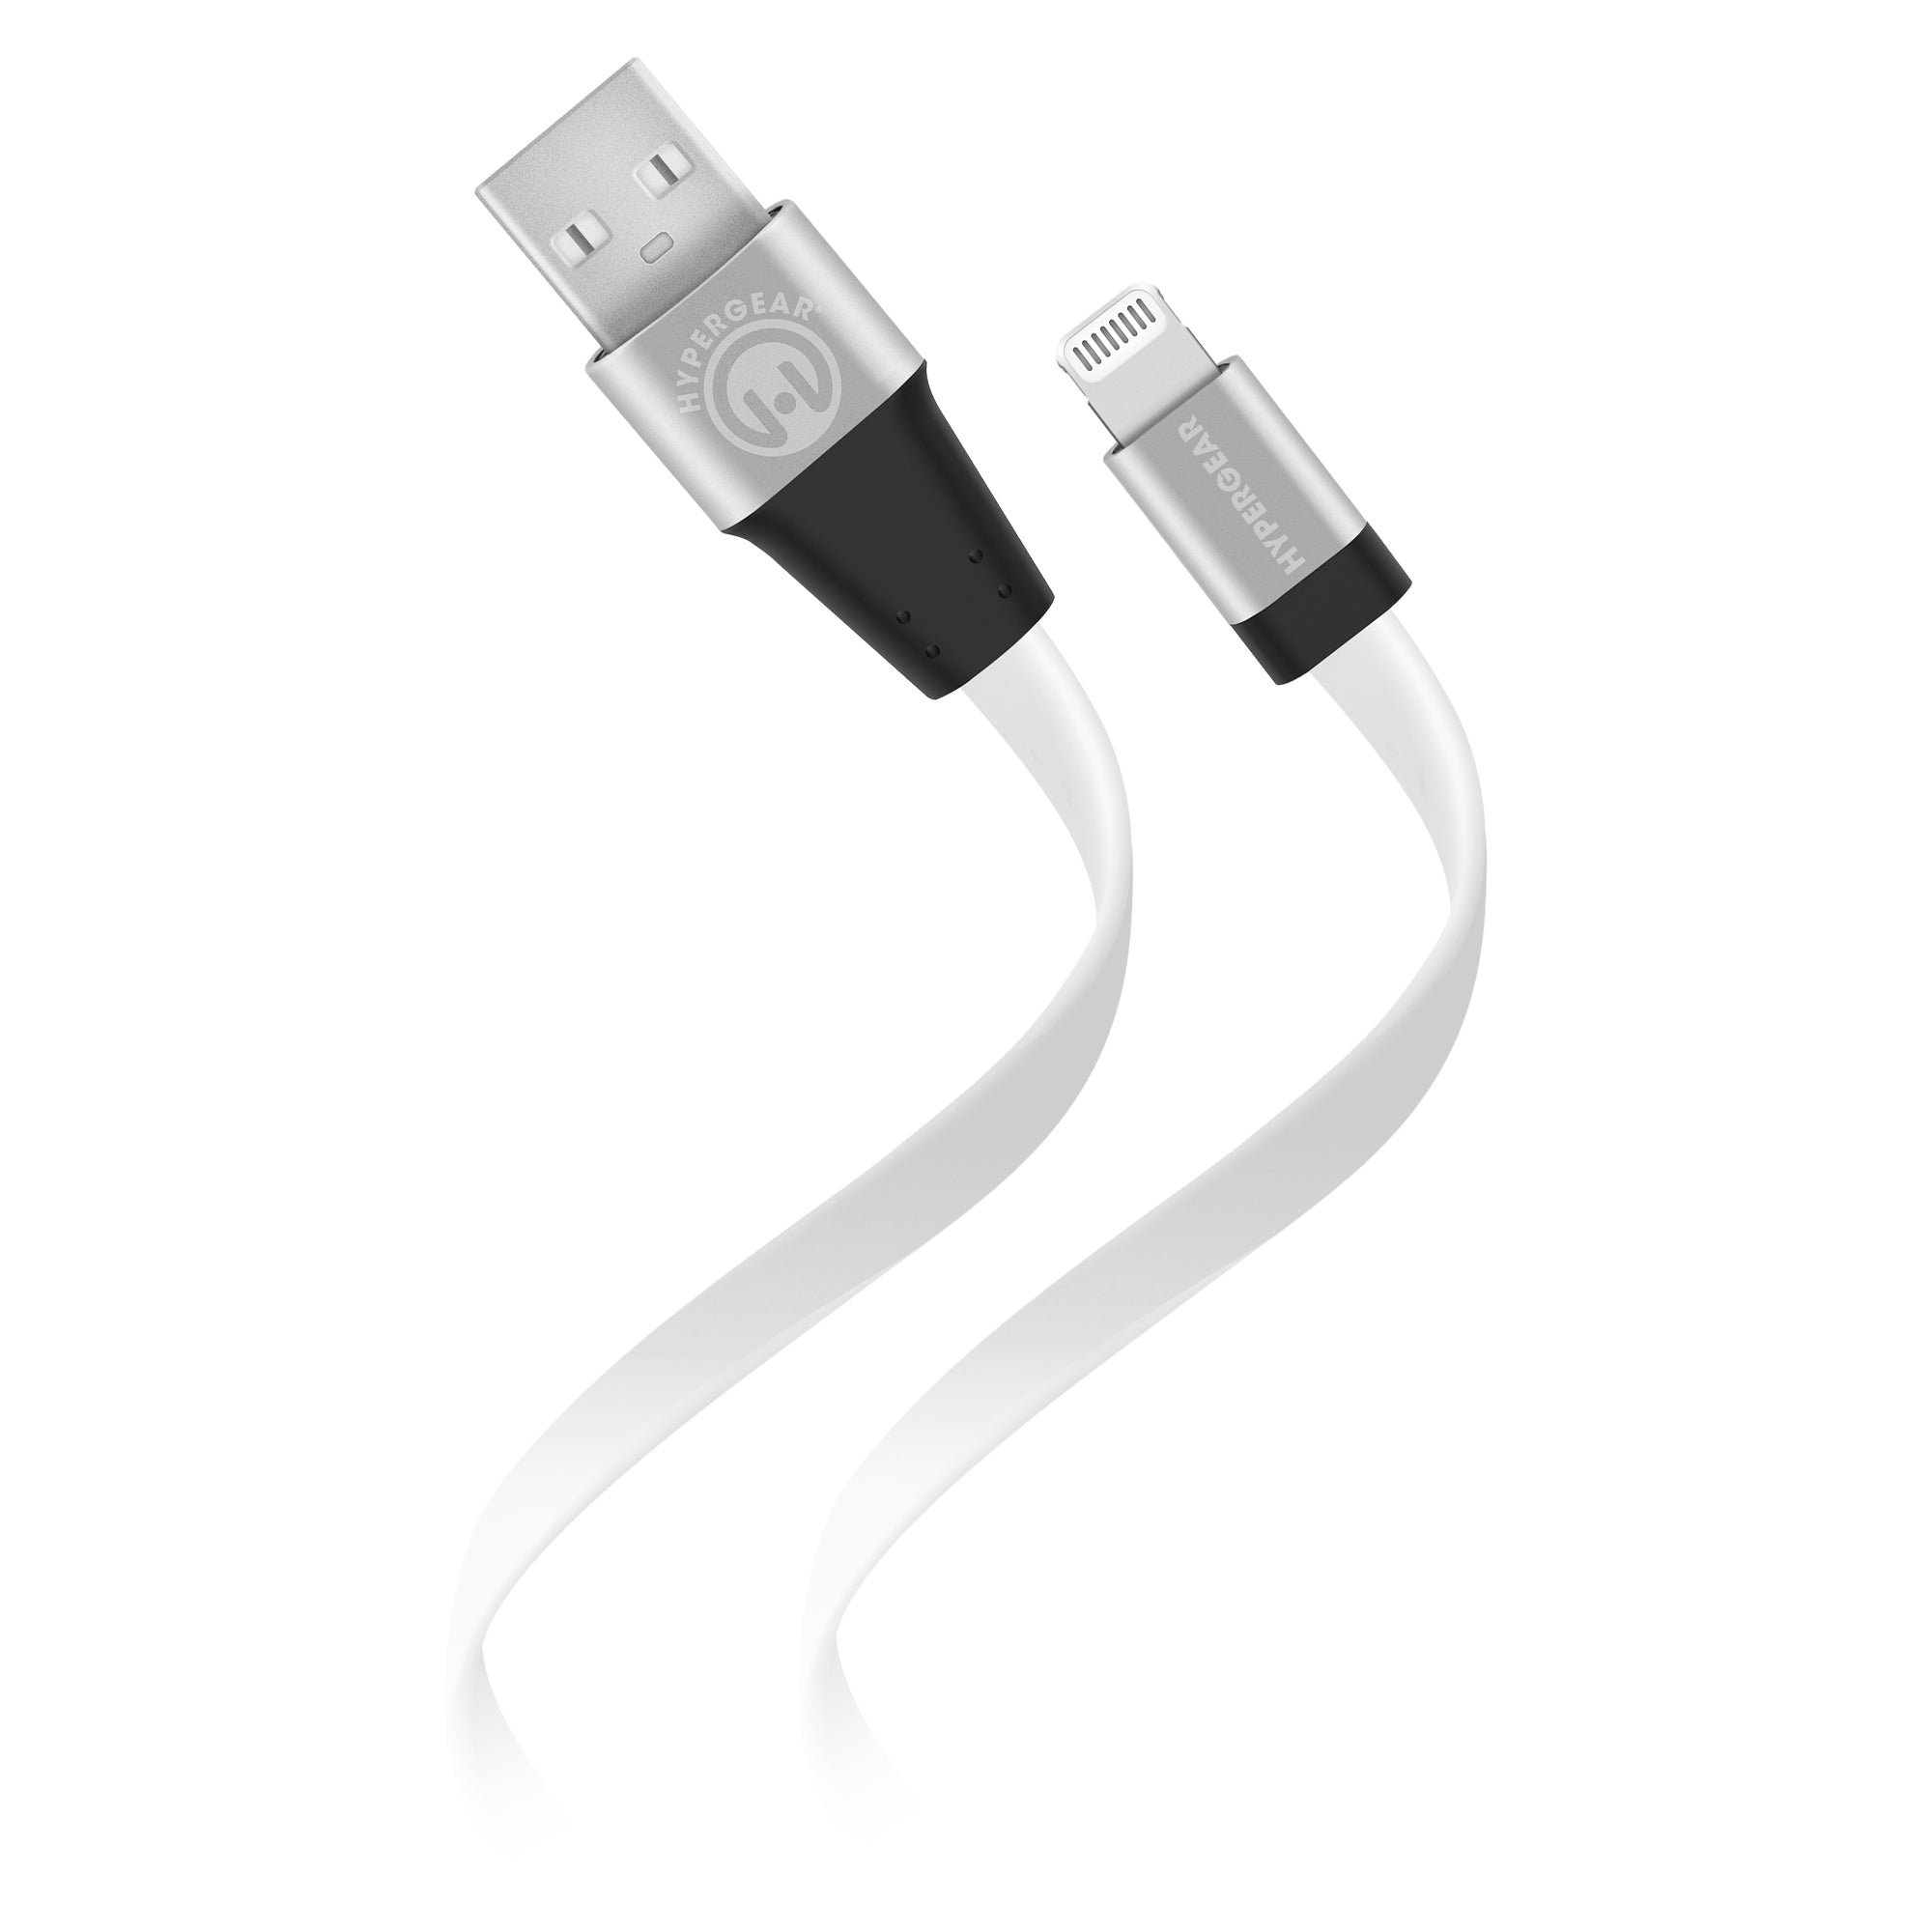 iPhone Charger Cable - USB to Lightning Cable 6ft